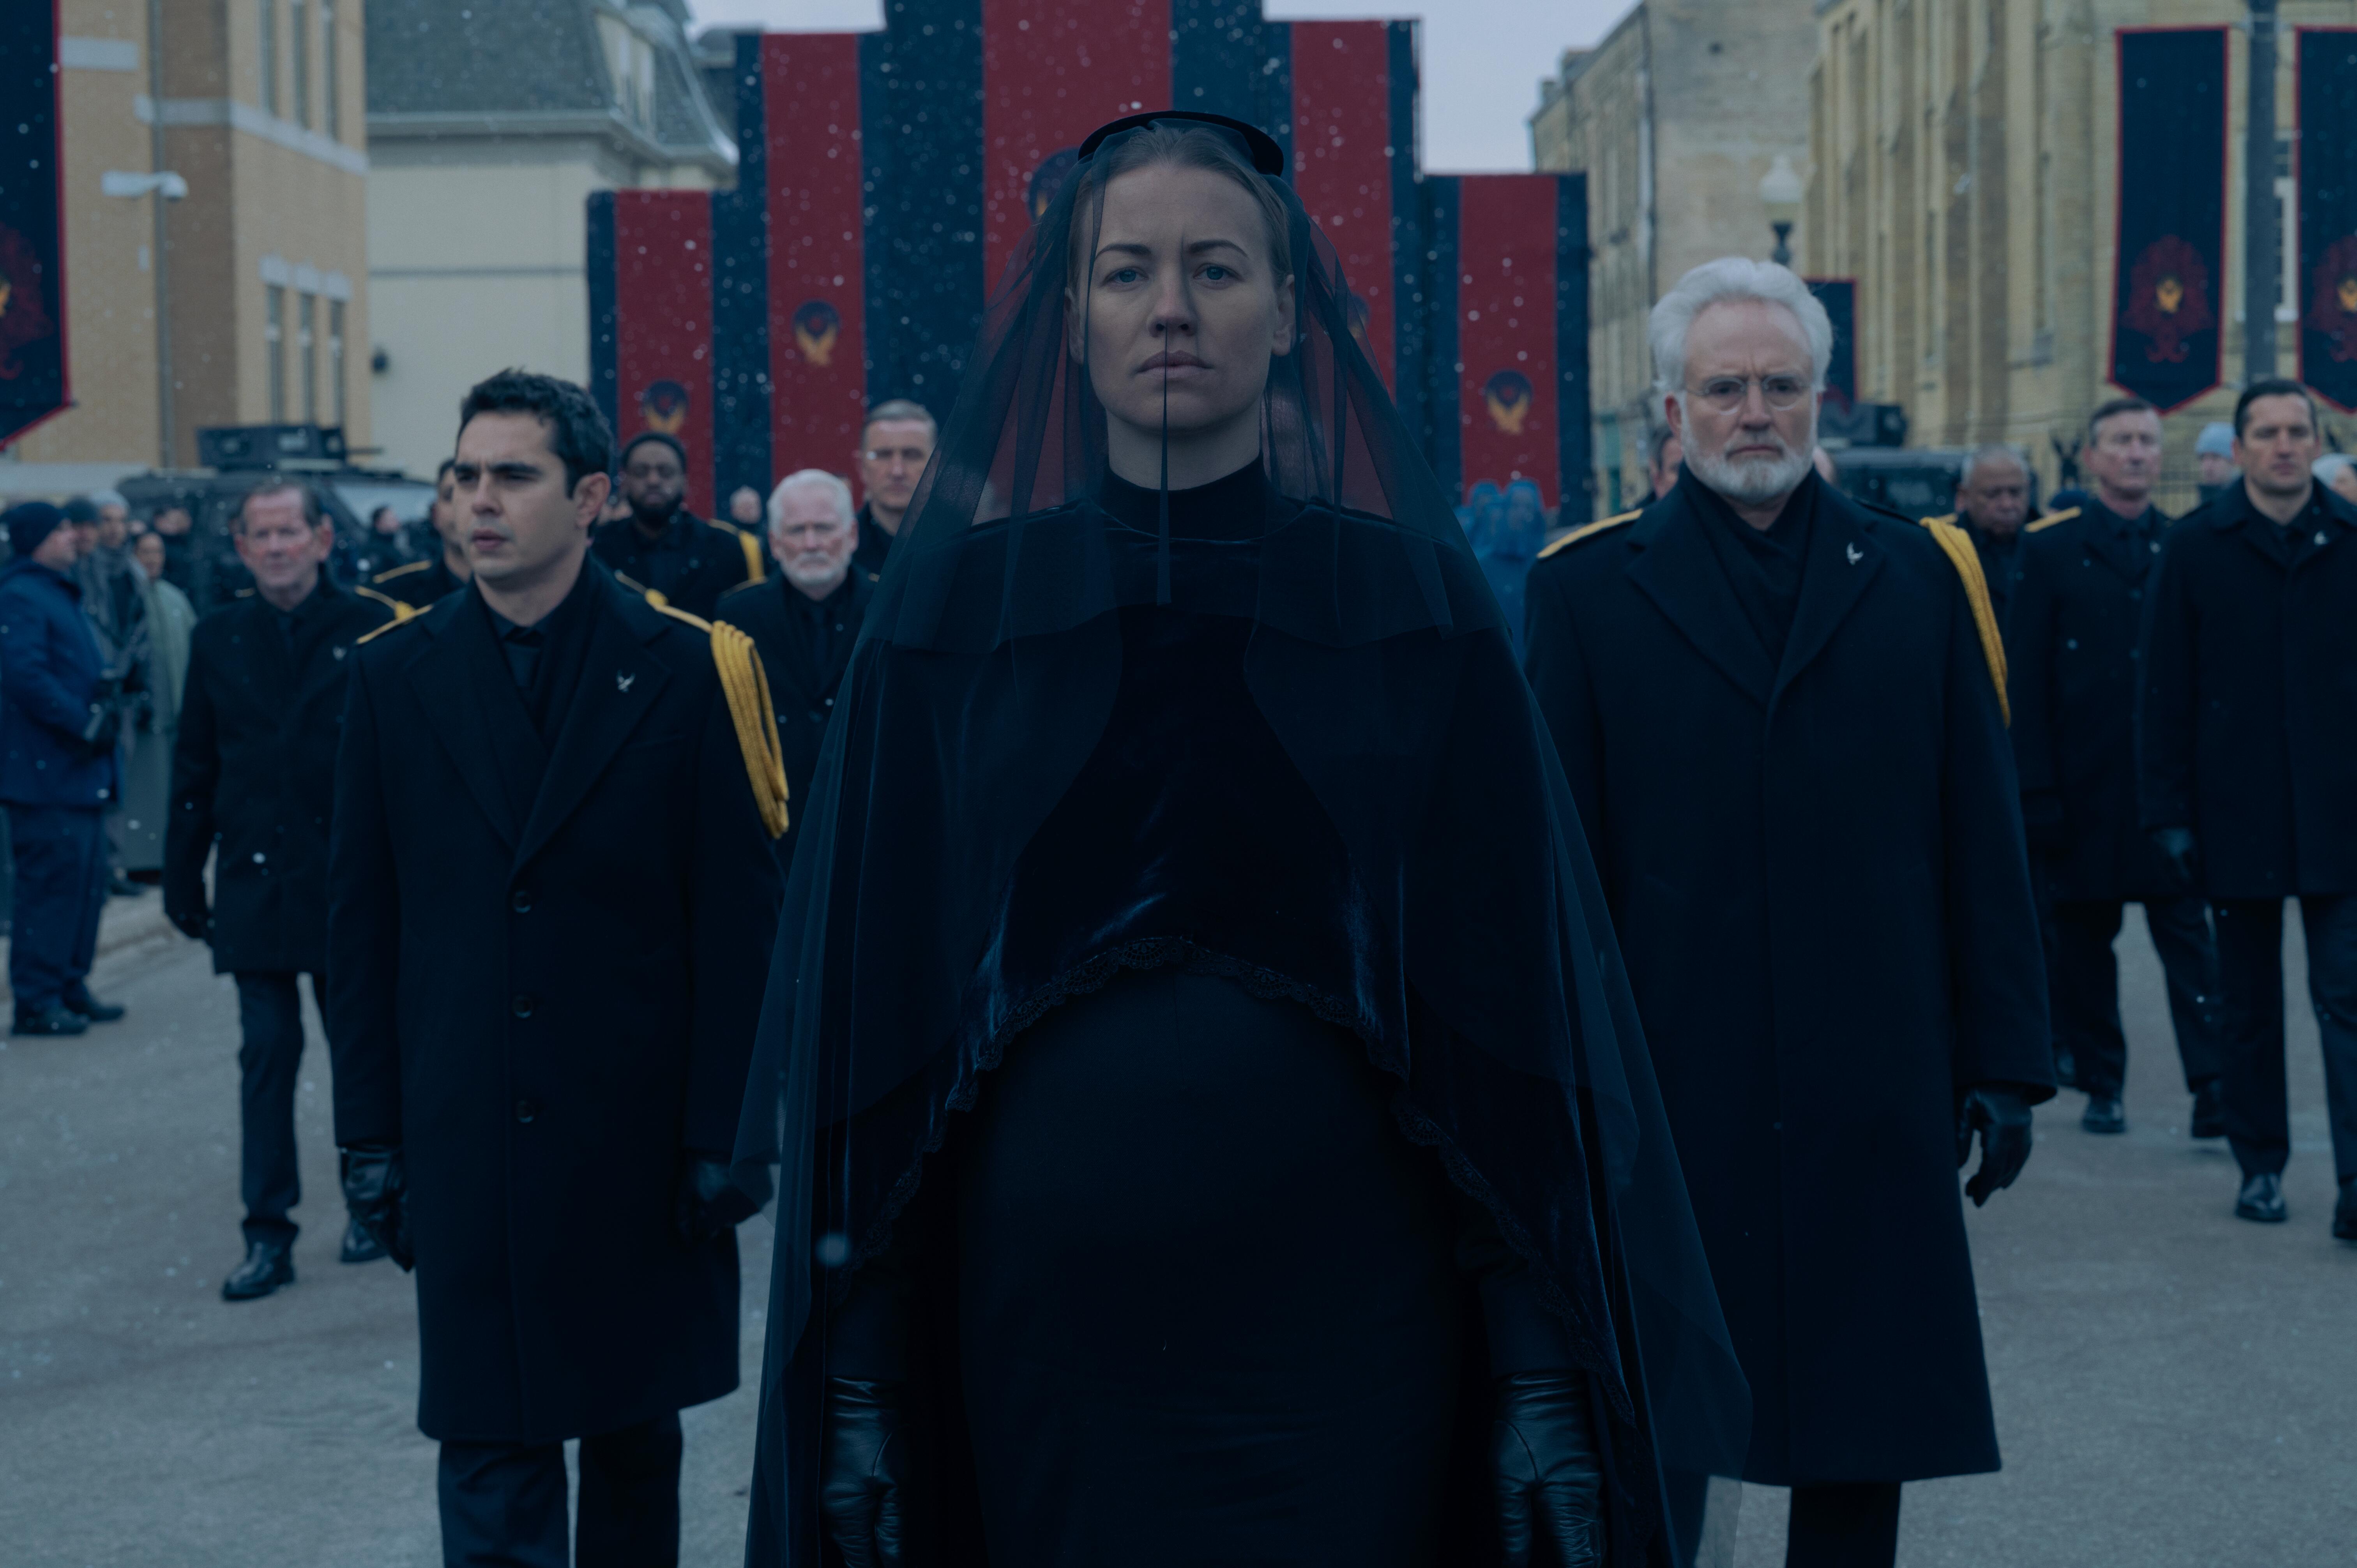 Nick Blaine, Serena Joy Waterford, and Joseph Lawrence walk in a funeral processional in 'The Handmaid's Tale'